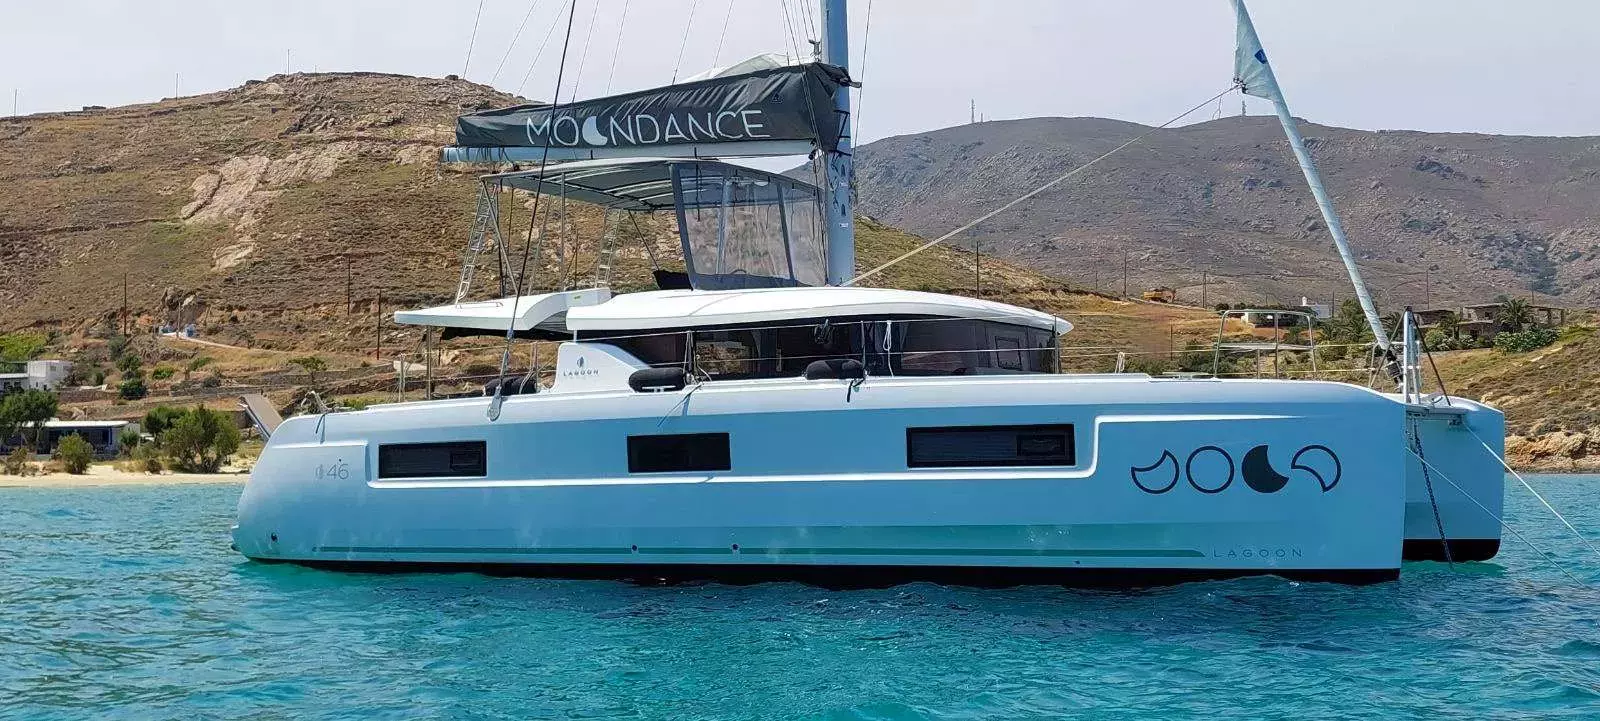 Moondance III by Lagoon - Top rates for a Charter of a private Power Catamaran in Cyprus